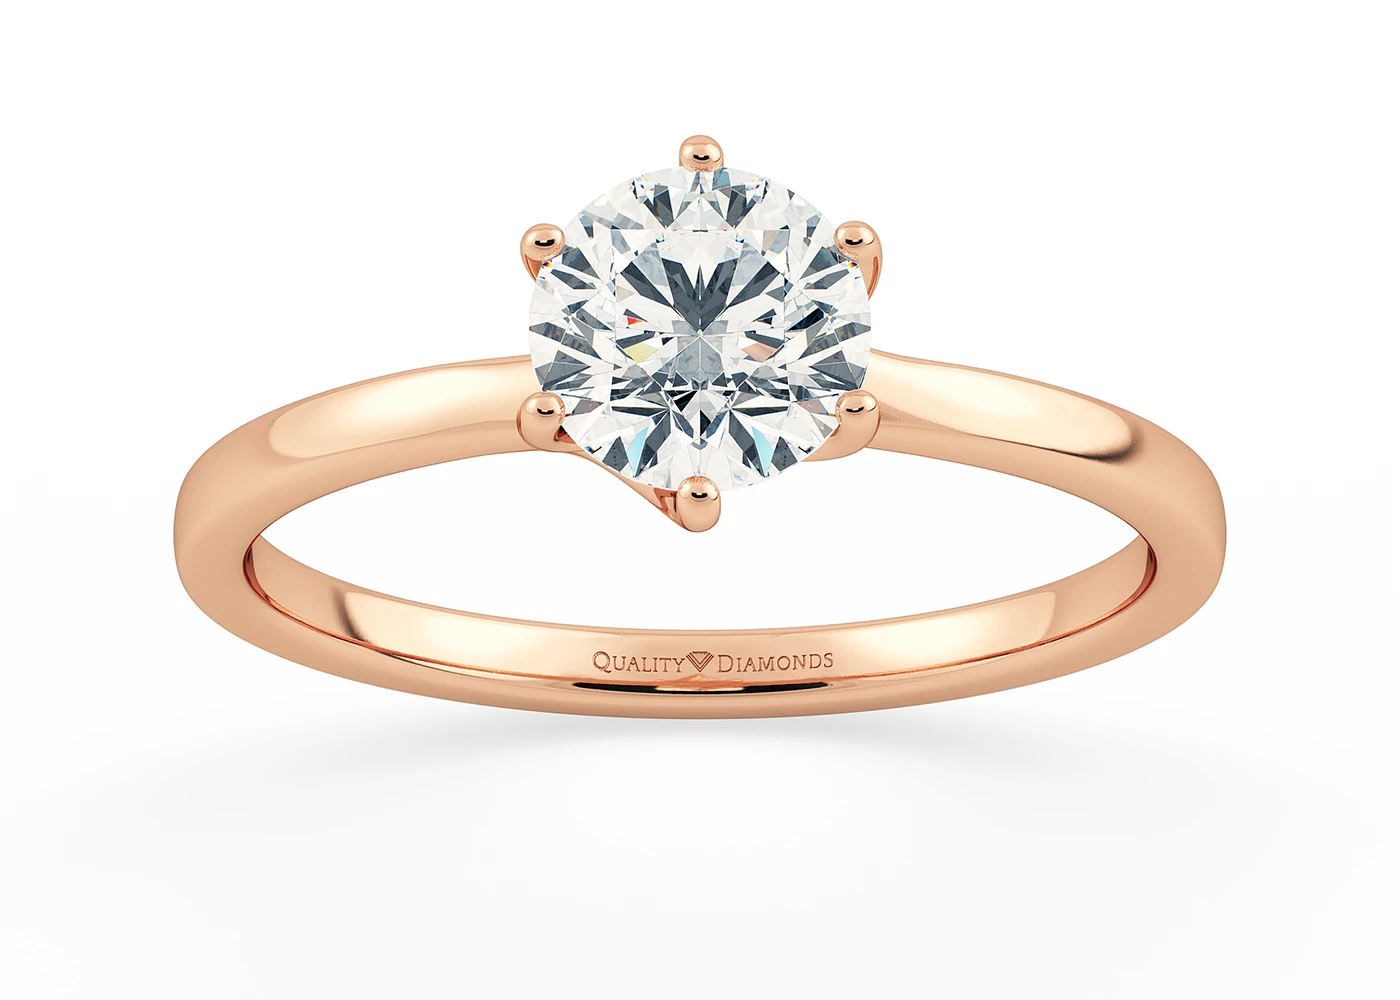 Six Claw Round Brilliant Cura Diamond Ring in 18K Rose Gold